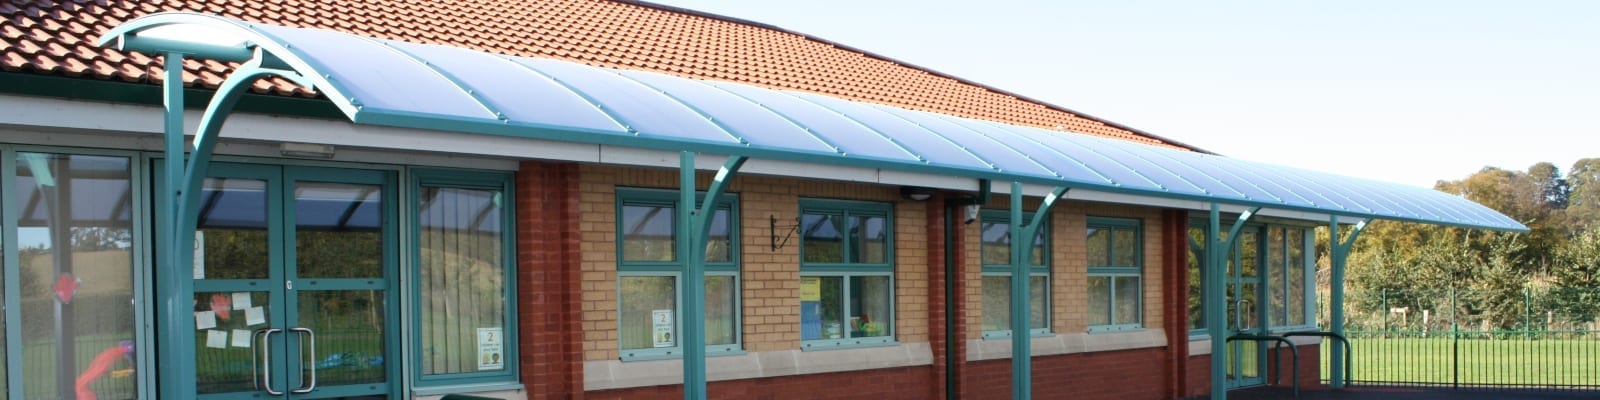 St Peter and Paul's RC Primary School Canopy